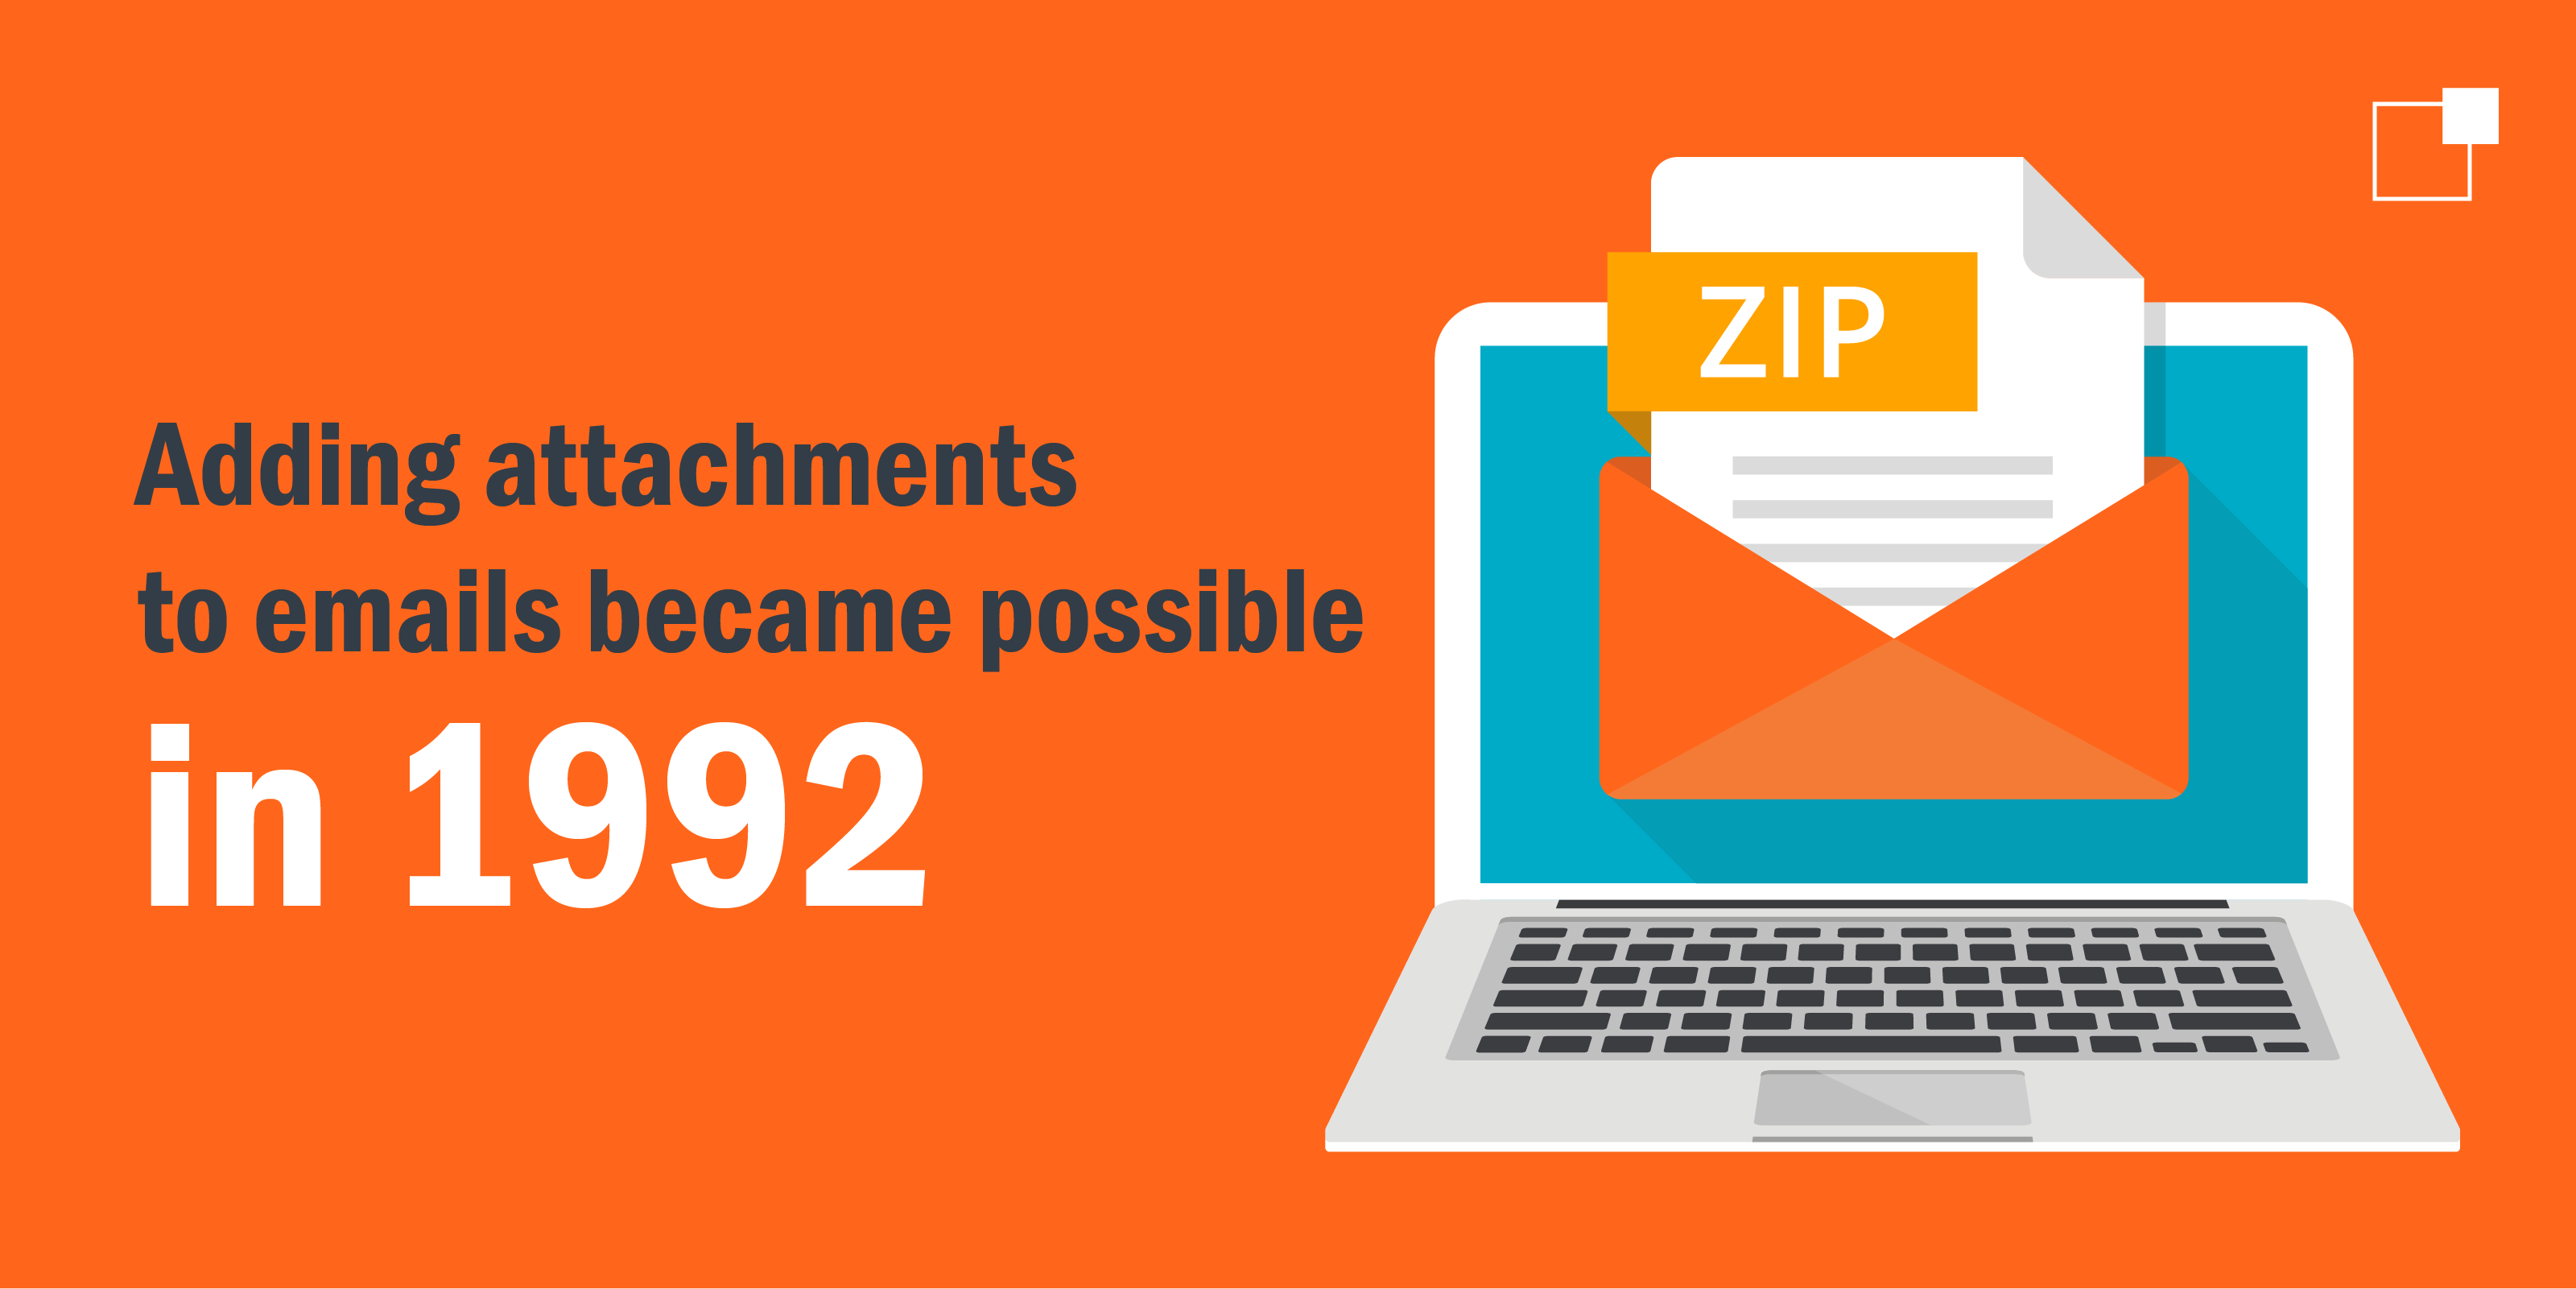 Adding attachments to emails became possible in 1992